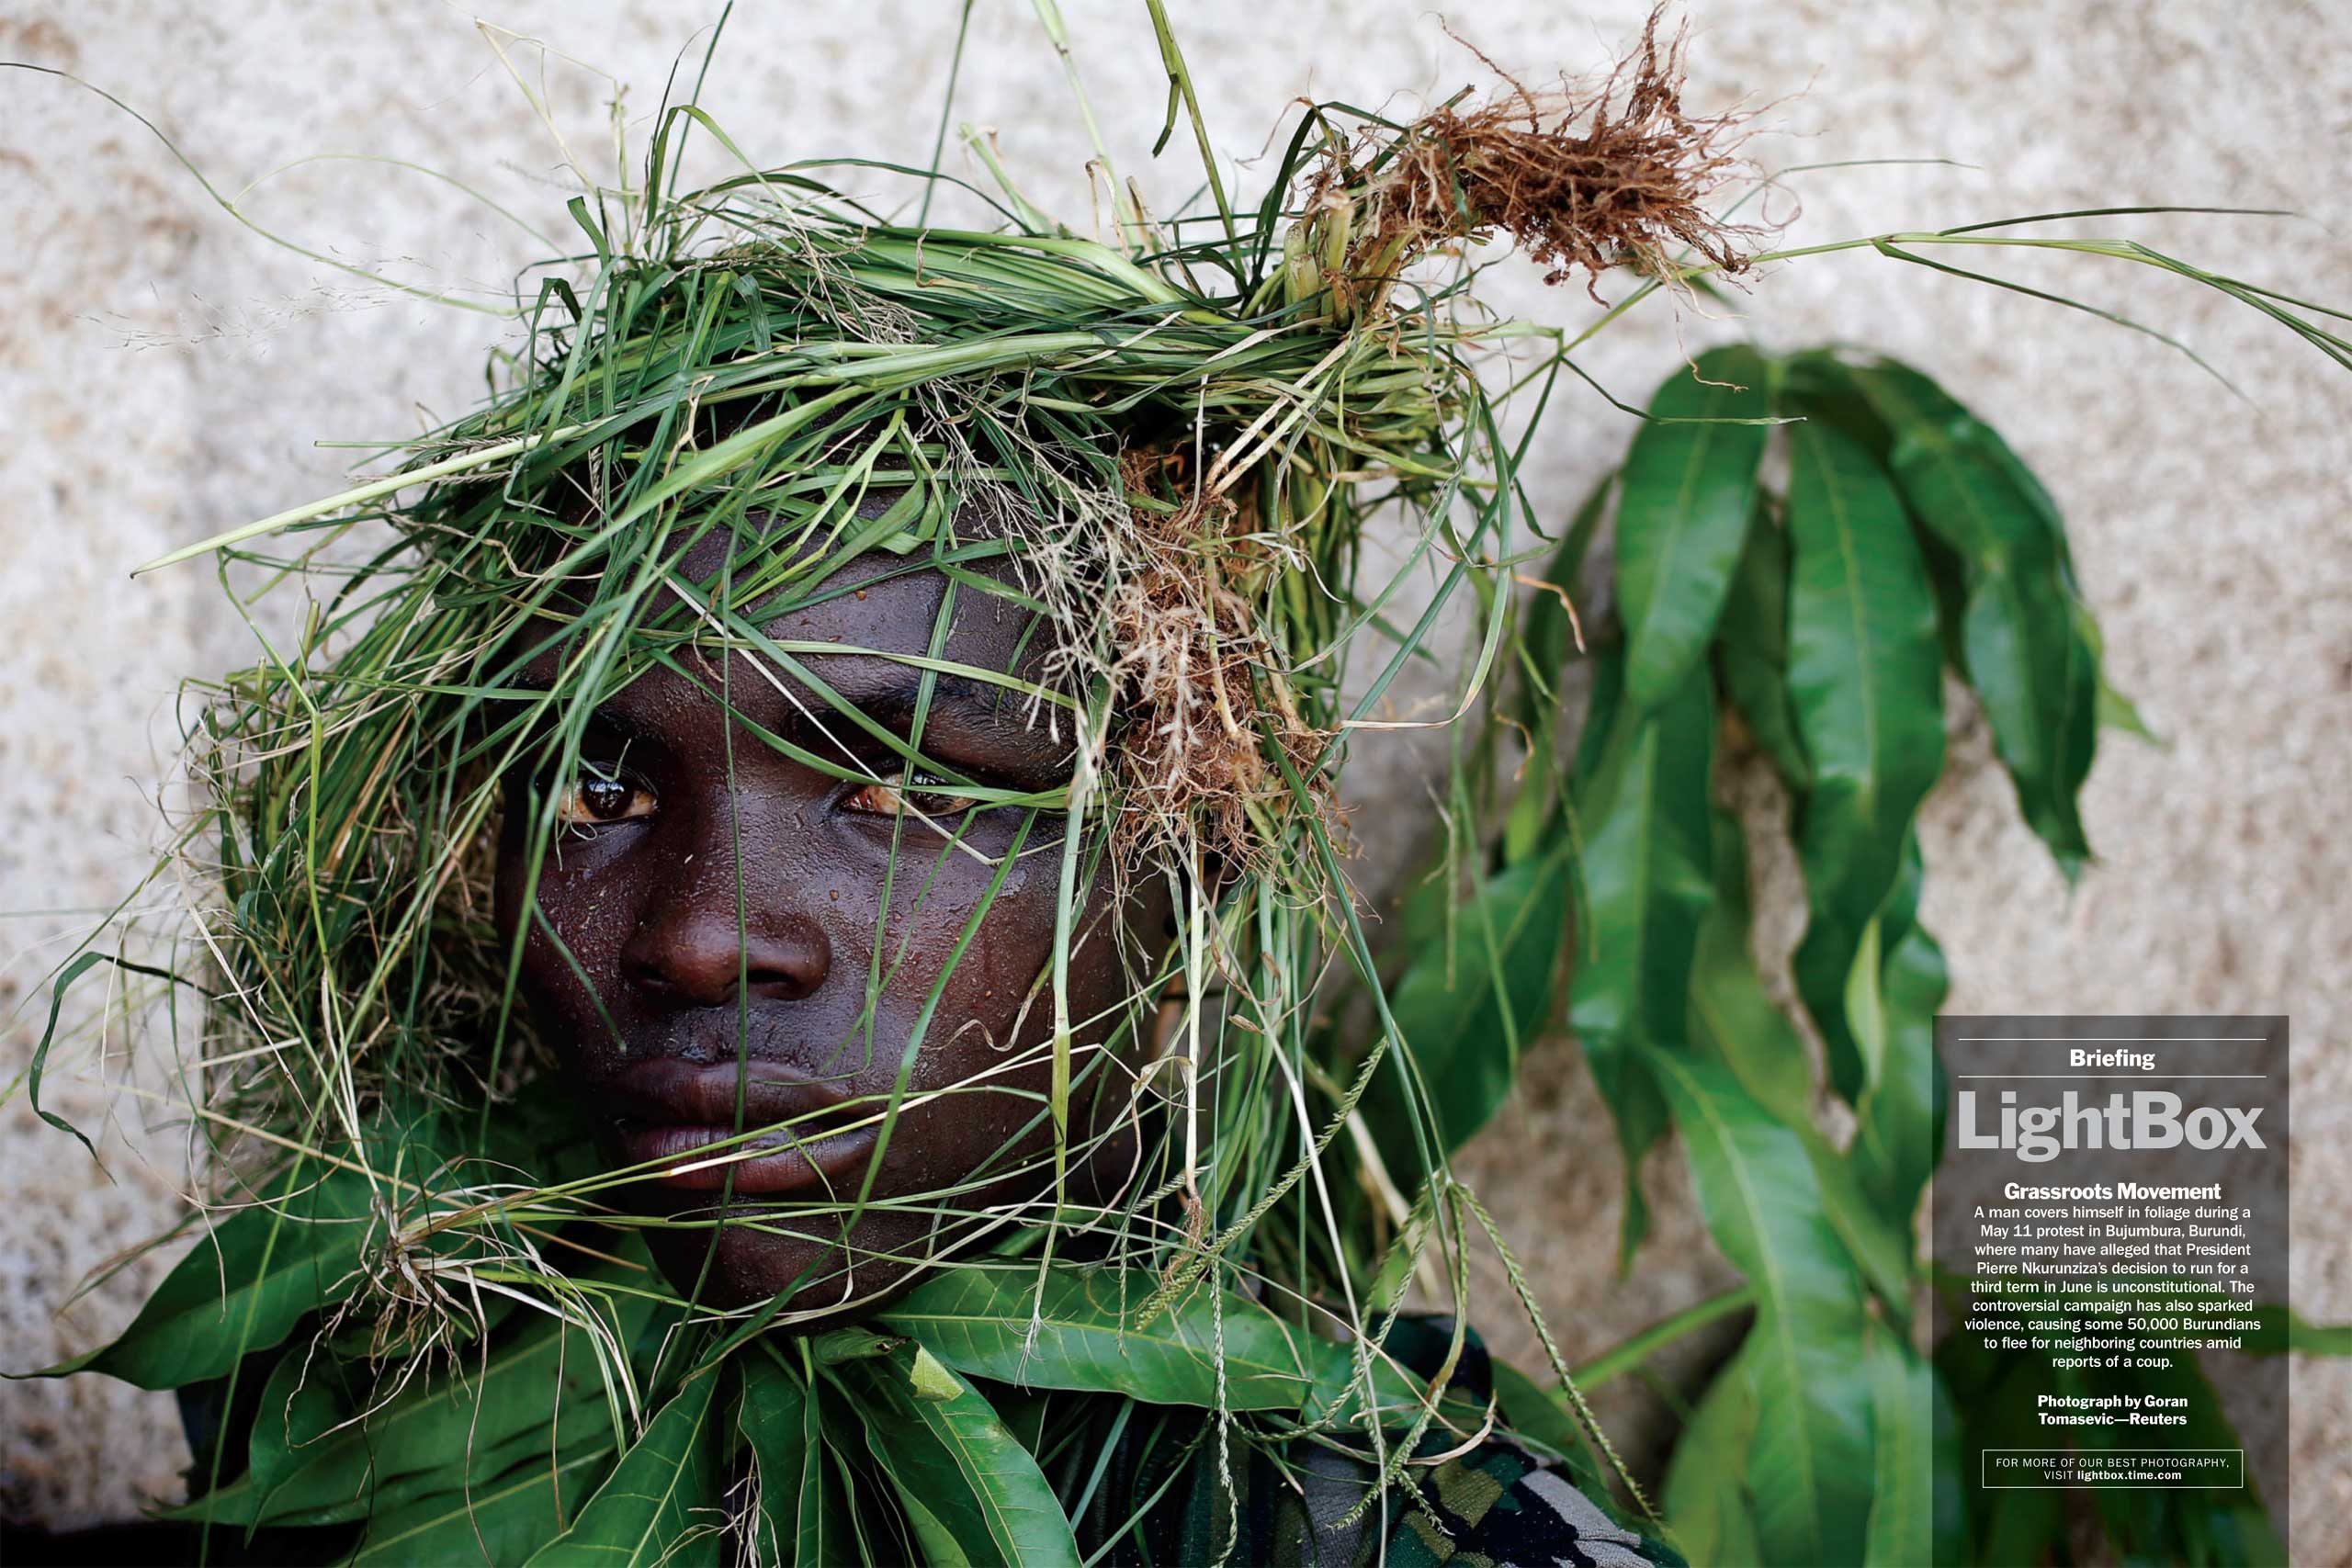 Photograph by Goran Tomasevic—ReutersA man covers himself in foliage during a May 11 protest in Bujumbura, Burundi, where many have alleged that President Pierre Nkurunziza's decision to run for a third term in June is unconstitutional. The controversial campaign has also sparked violence, causing some 50,000 Burundians to flee for neighboring countries amid reports of a coup. (TIME issue May 25, 2015)